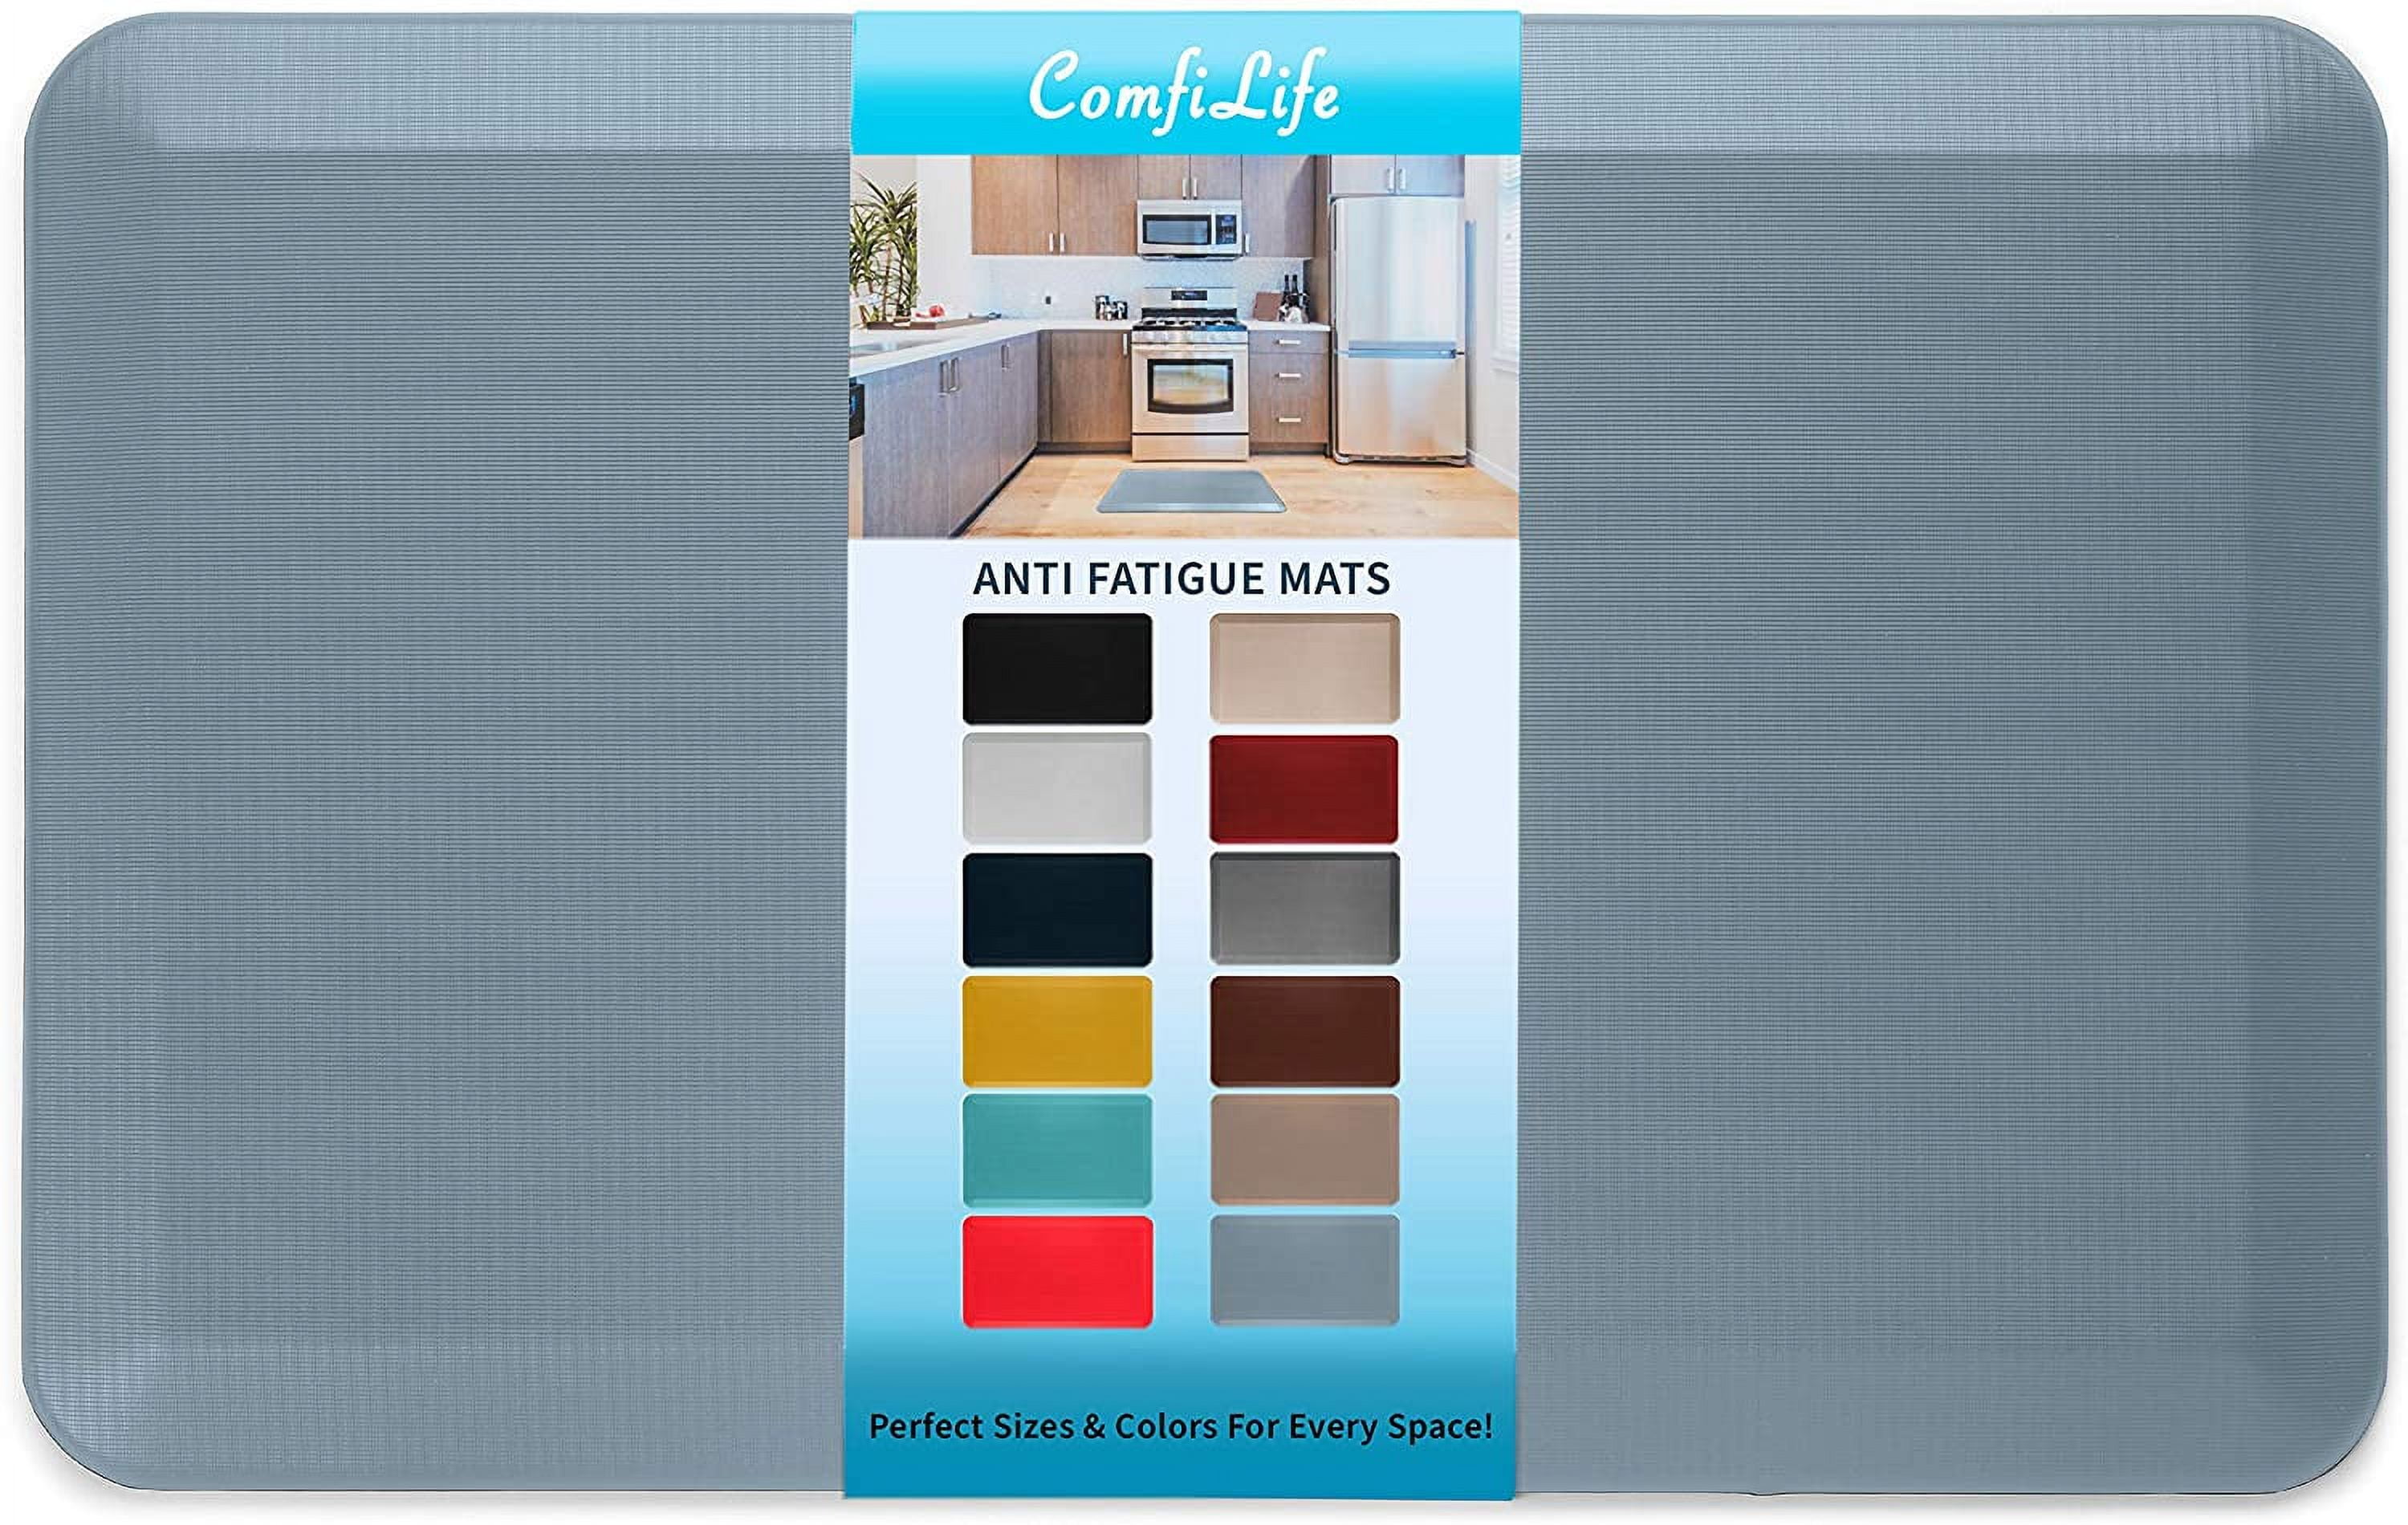 Comfort Anti Fatigue Mat,9/10 inch, Extra Support and Thick, Perfect for  Kitchens, Standing Desks and Garages, Phthalate Free,Relieves Foot,Knee,and